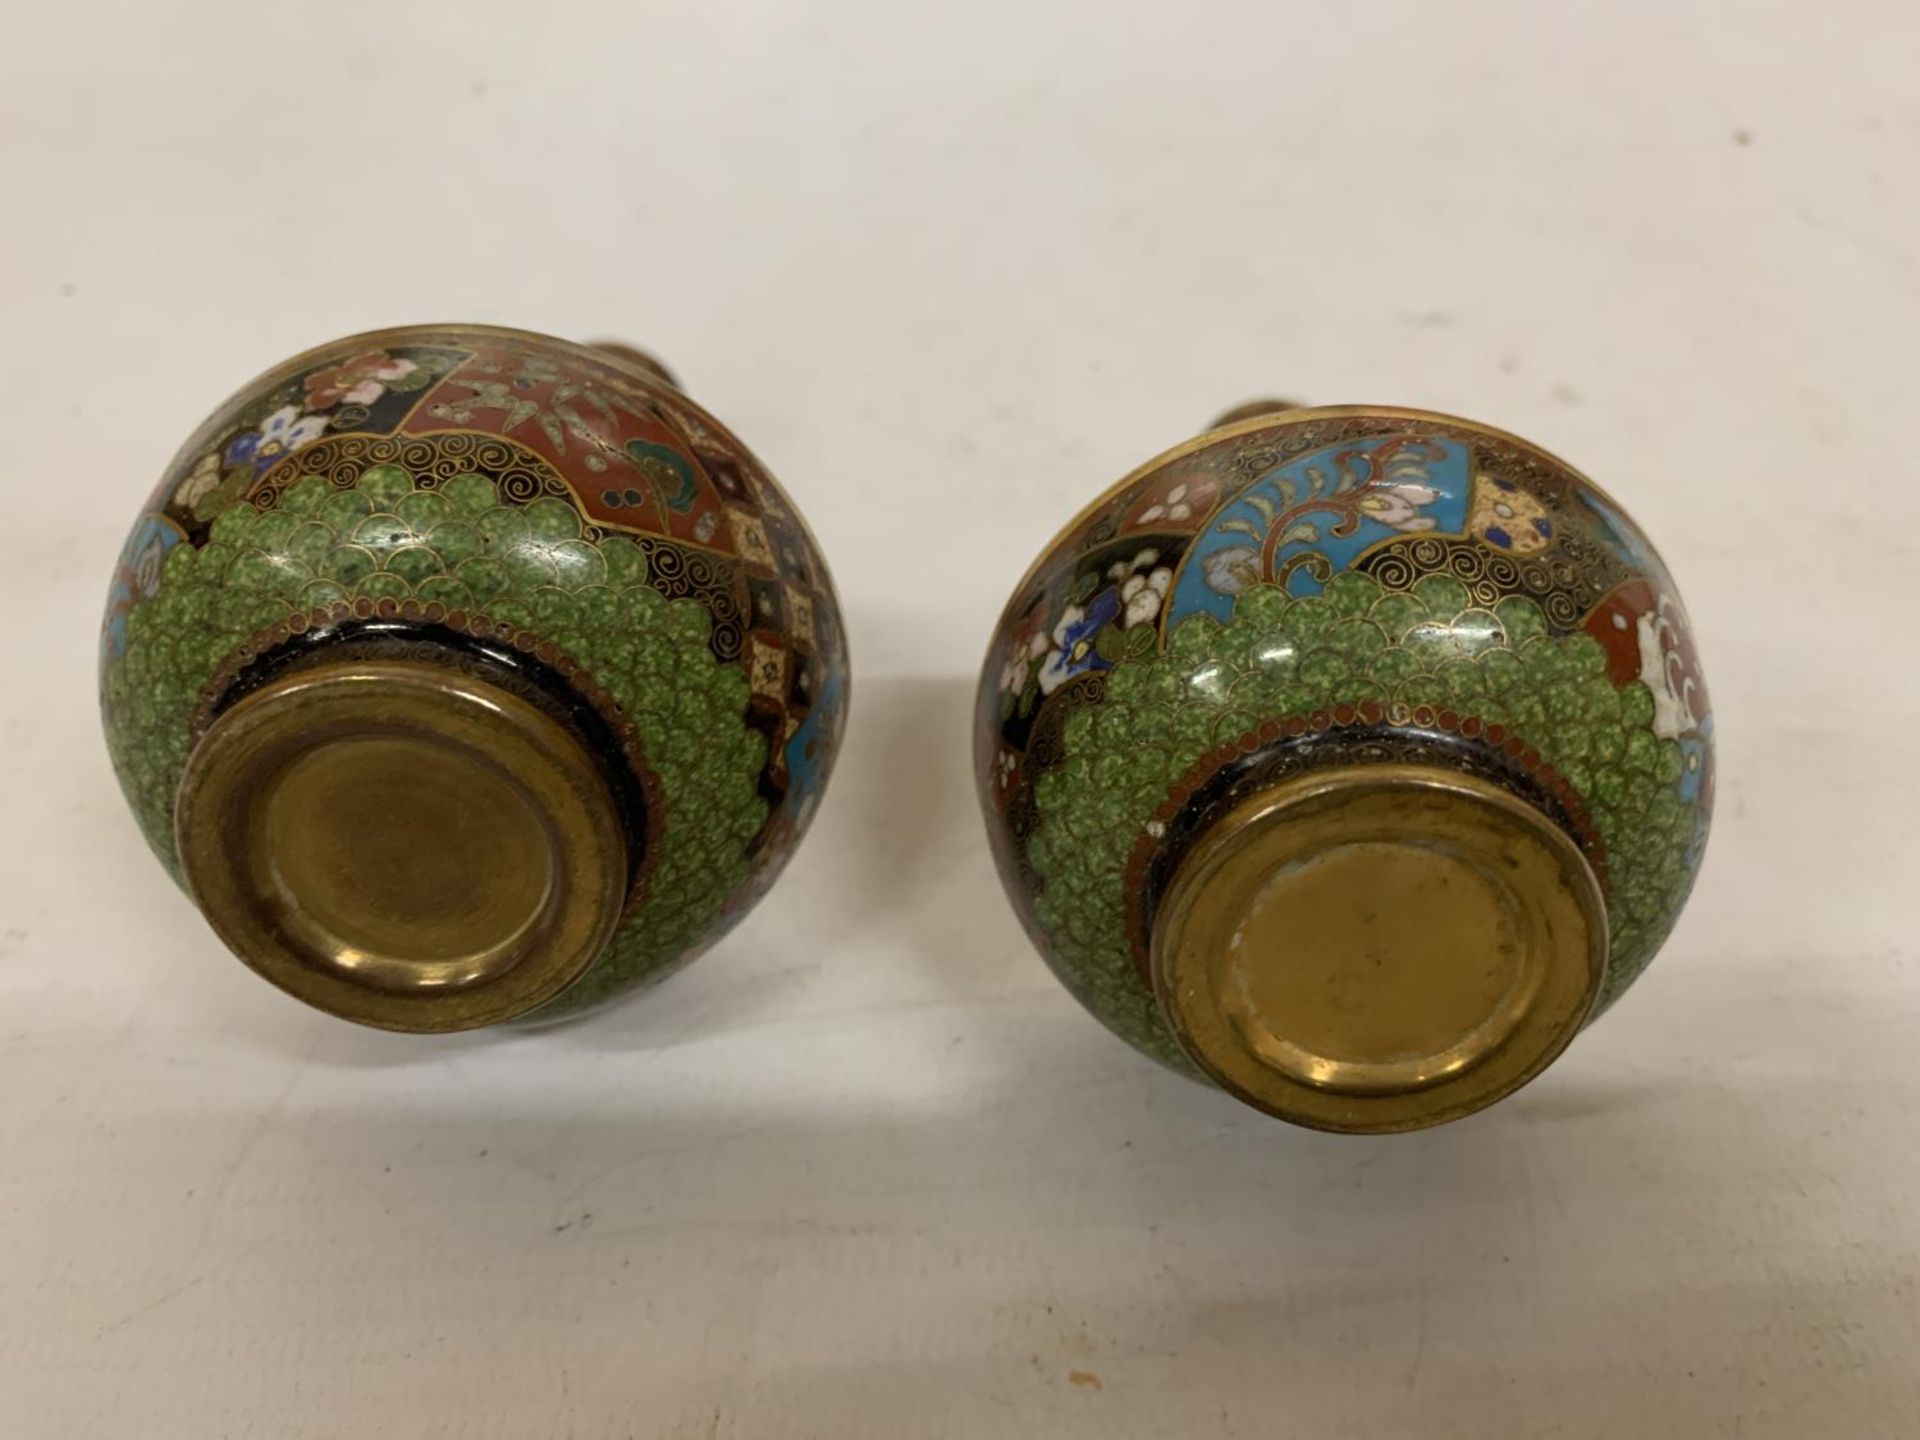 A PAIR OF CHINESE CLOISONNE ENAMEL BRASS VASES - 10 CM - Image 3 of 3